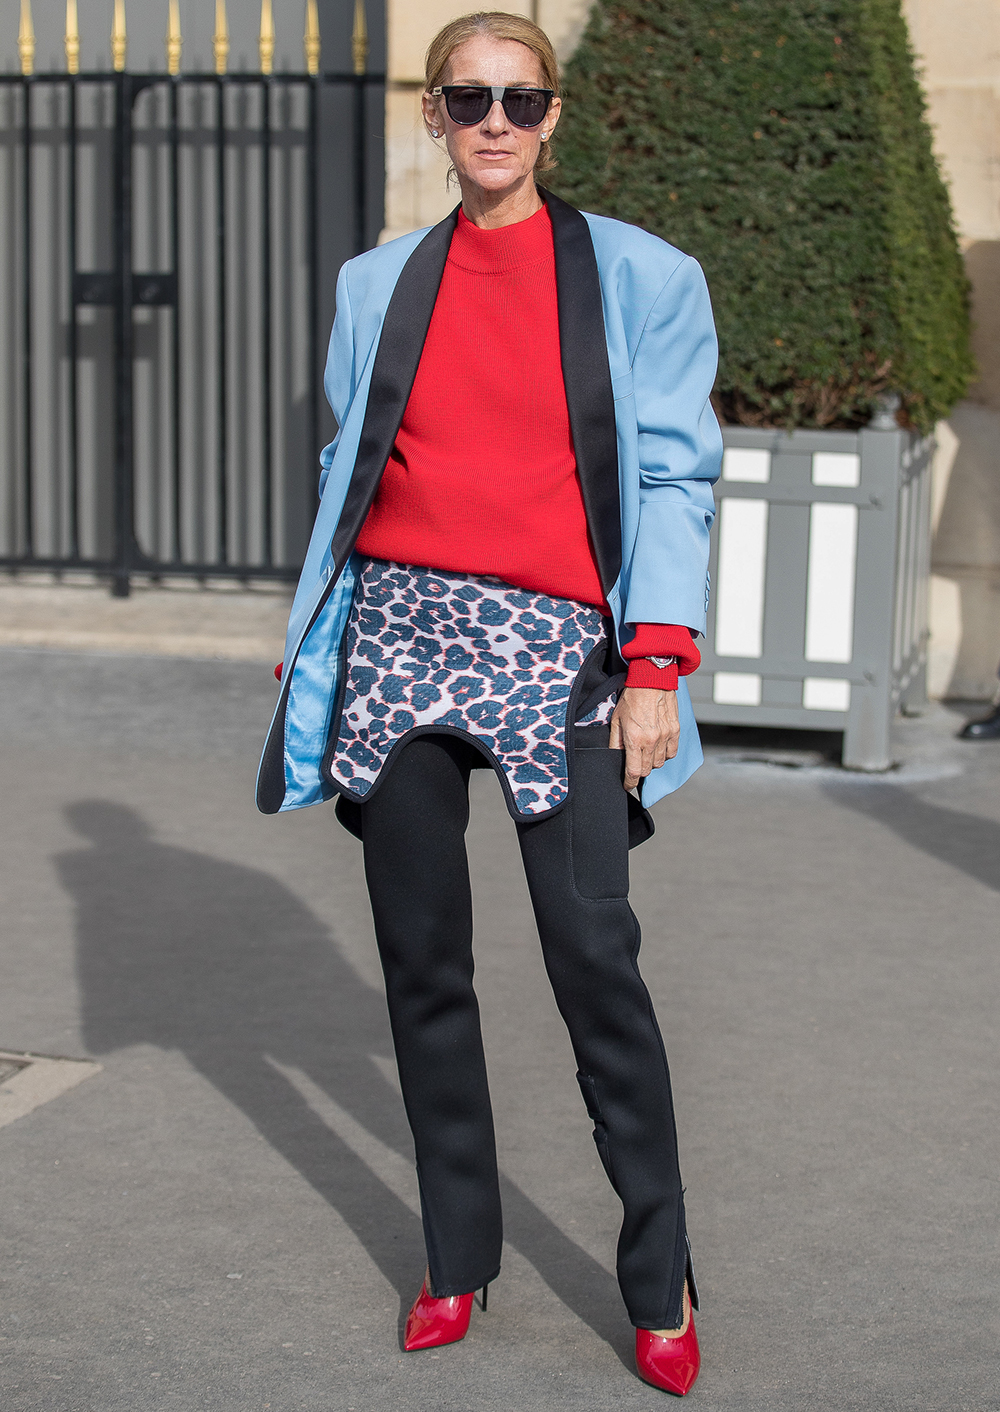 over 50 fashion and clothing inspiration: Celine Dion in a blue blazer, red jumper and skinny trousers